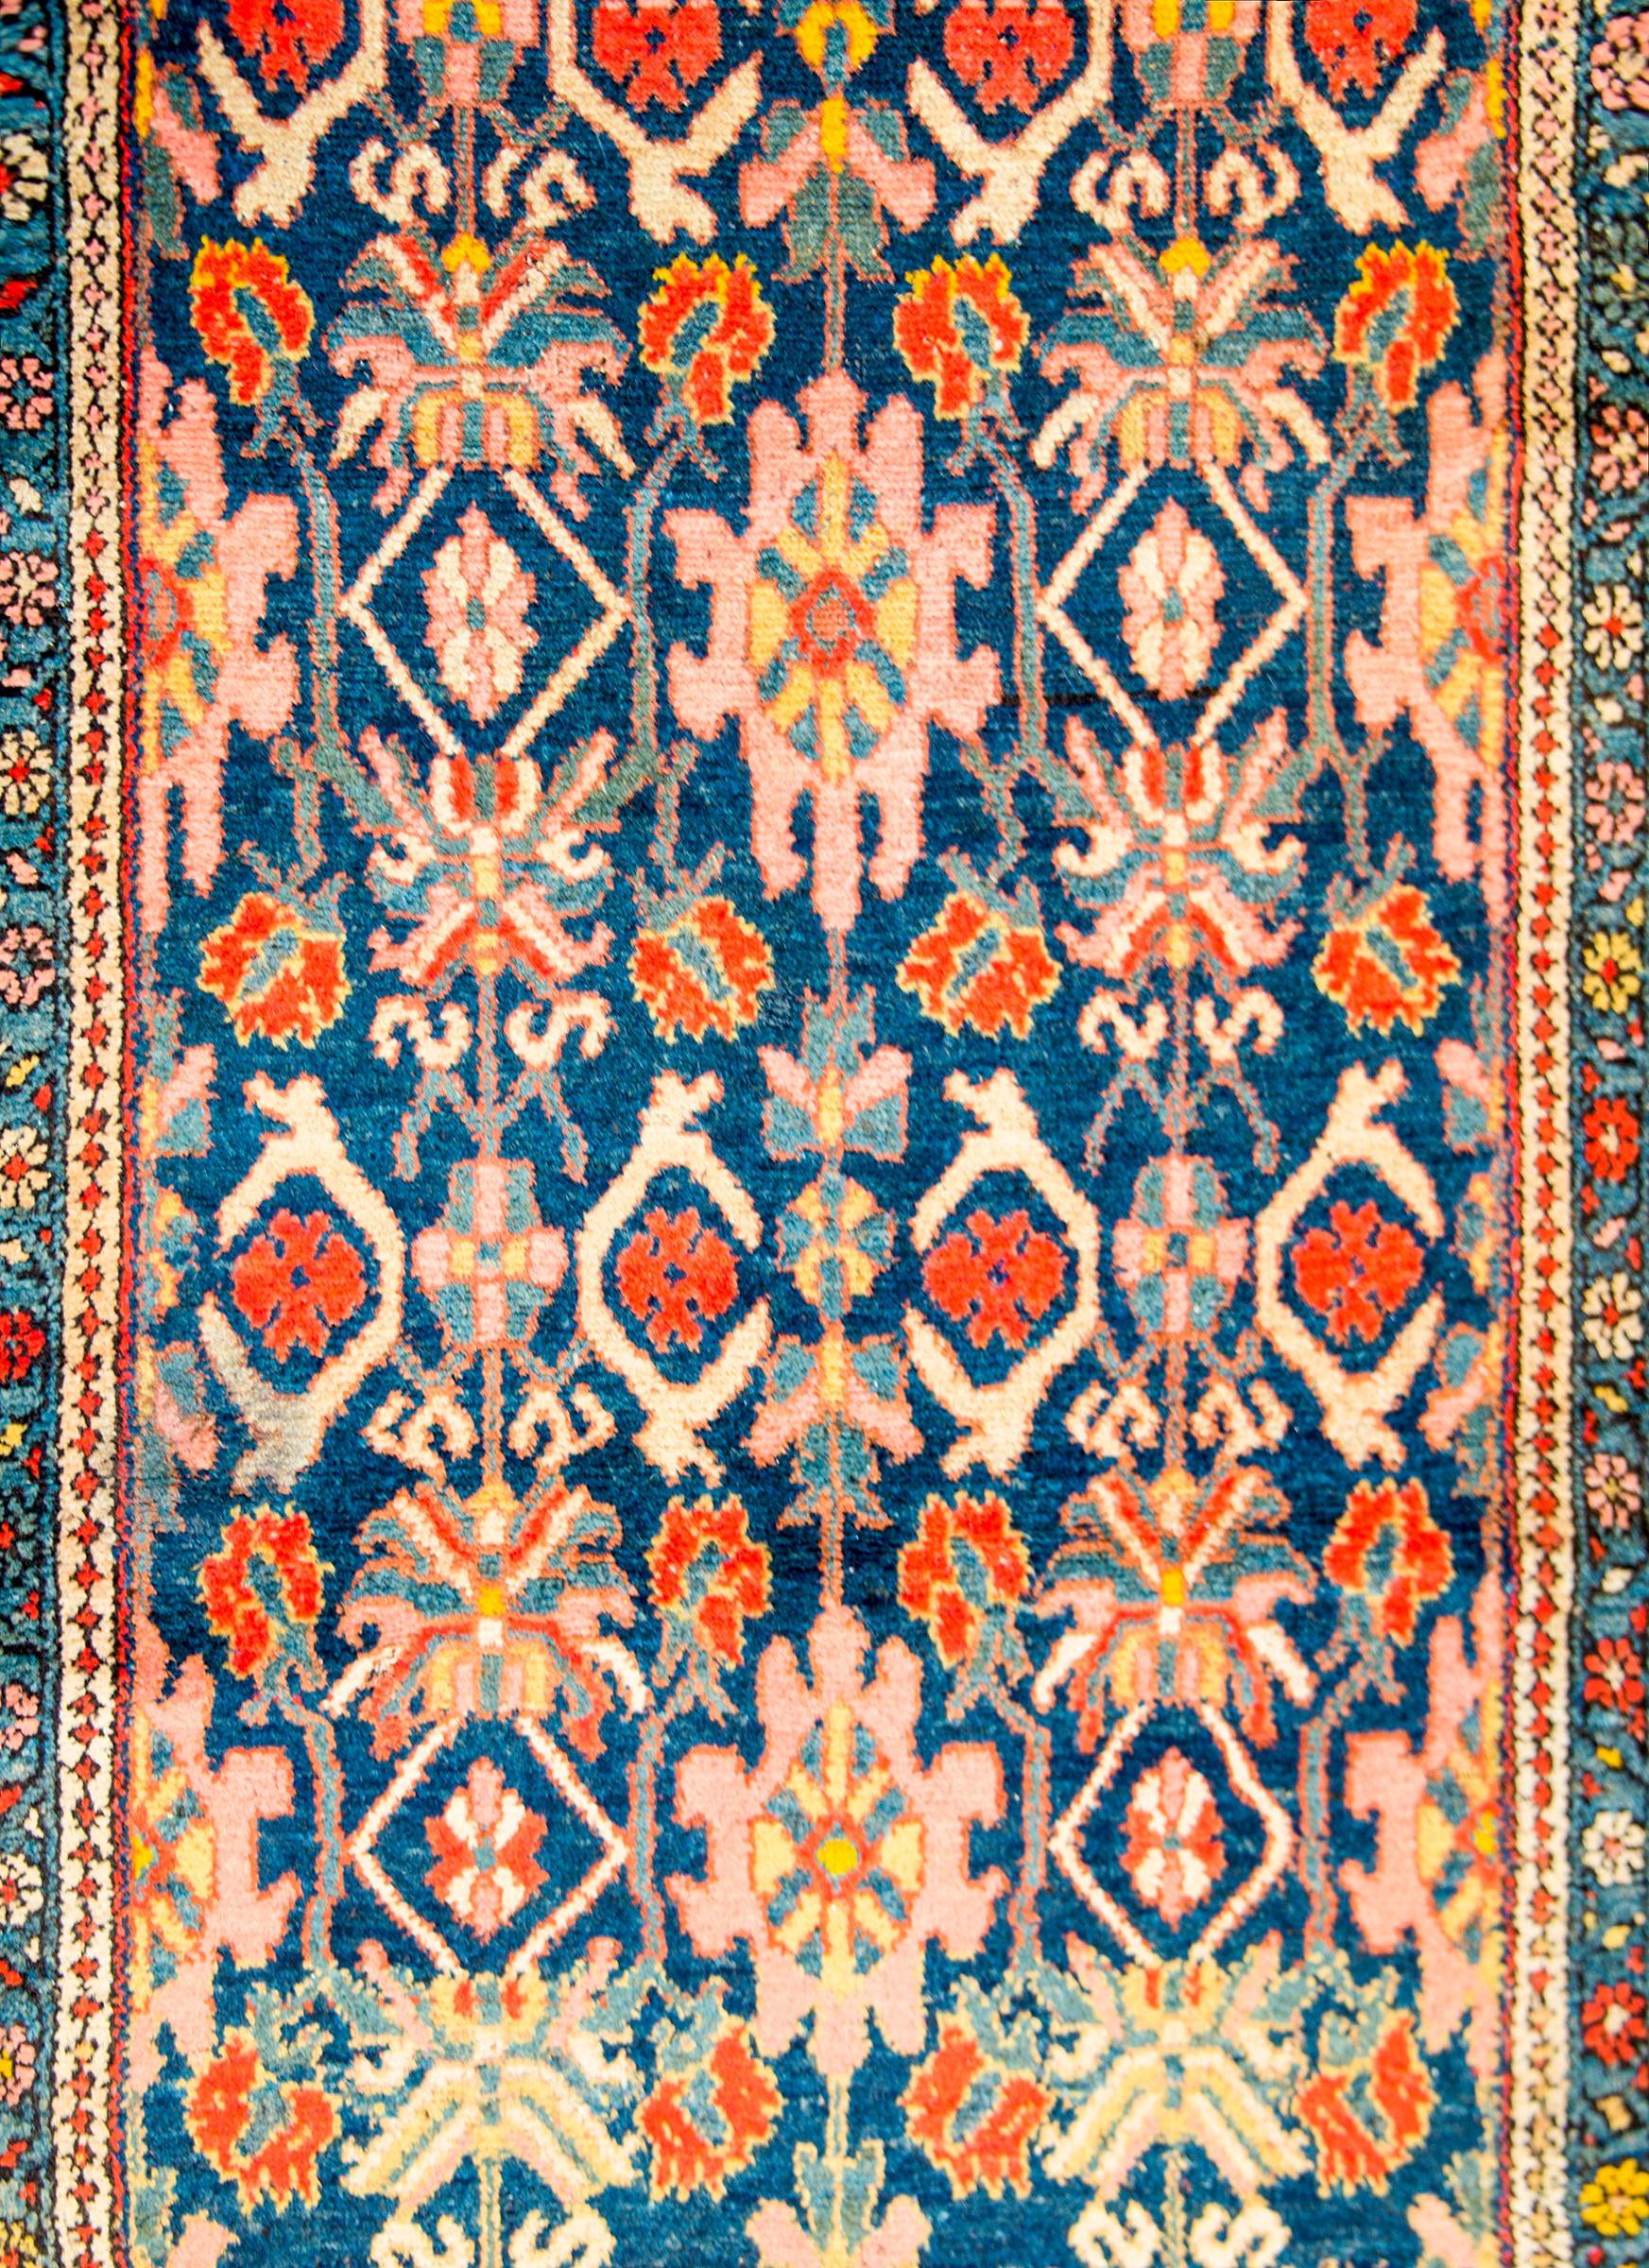 An amazing early 20th century Persian Malayer rug with an all-over trellised floral, leaf, and vine pattern woven in pink, yellow, crimson, and light indigo, on a dark indigo background. The border is composed with one central floral and vine stripe